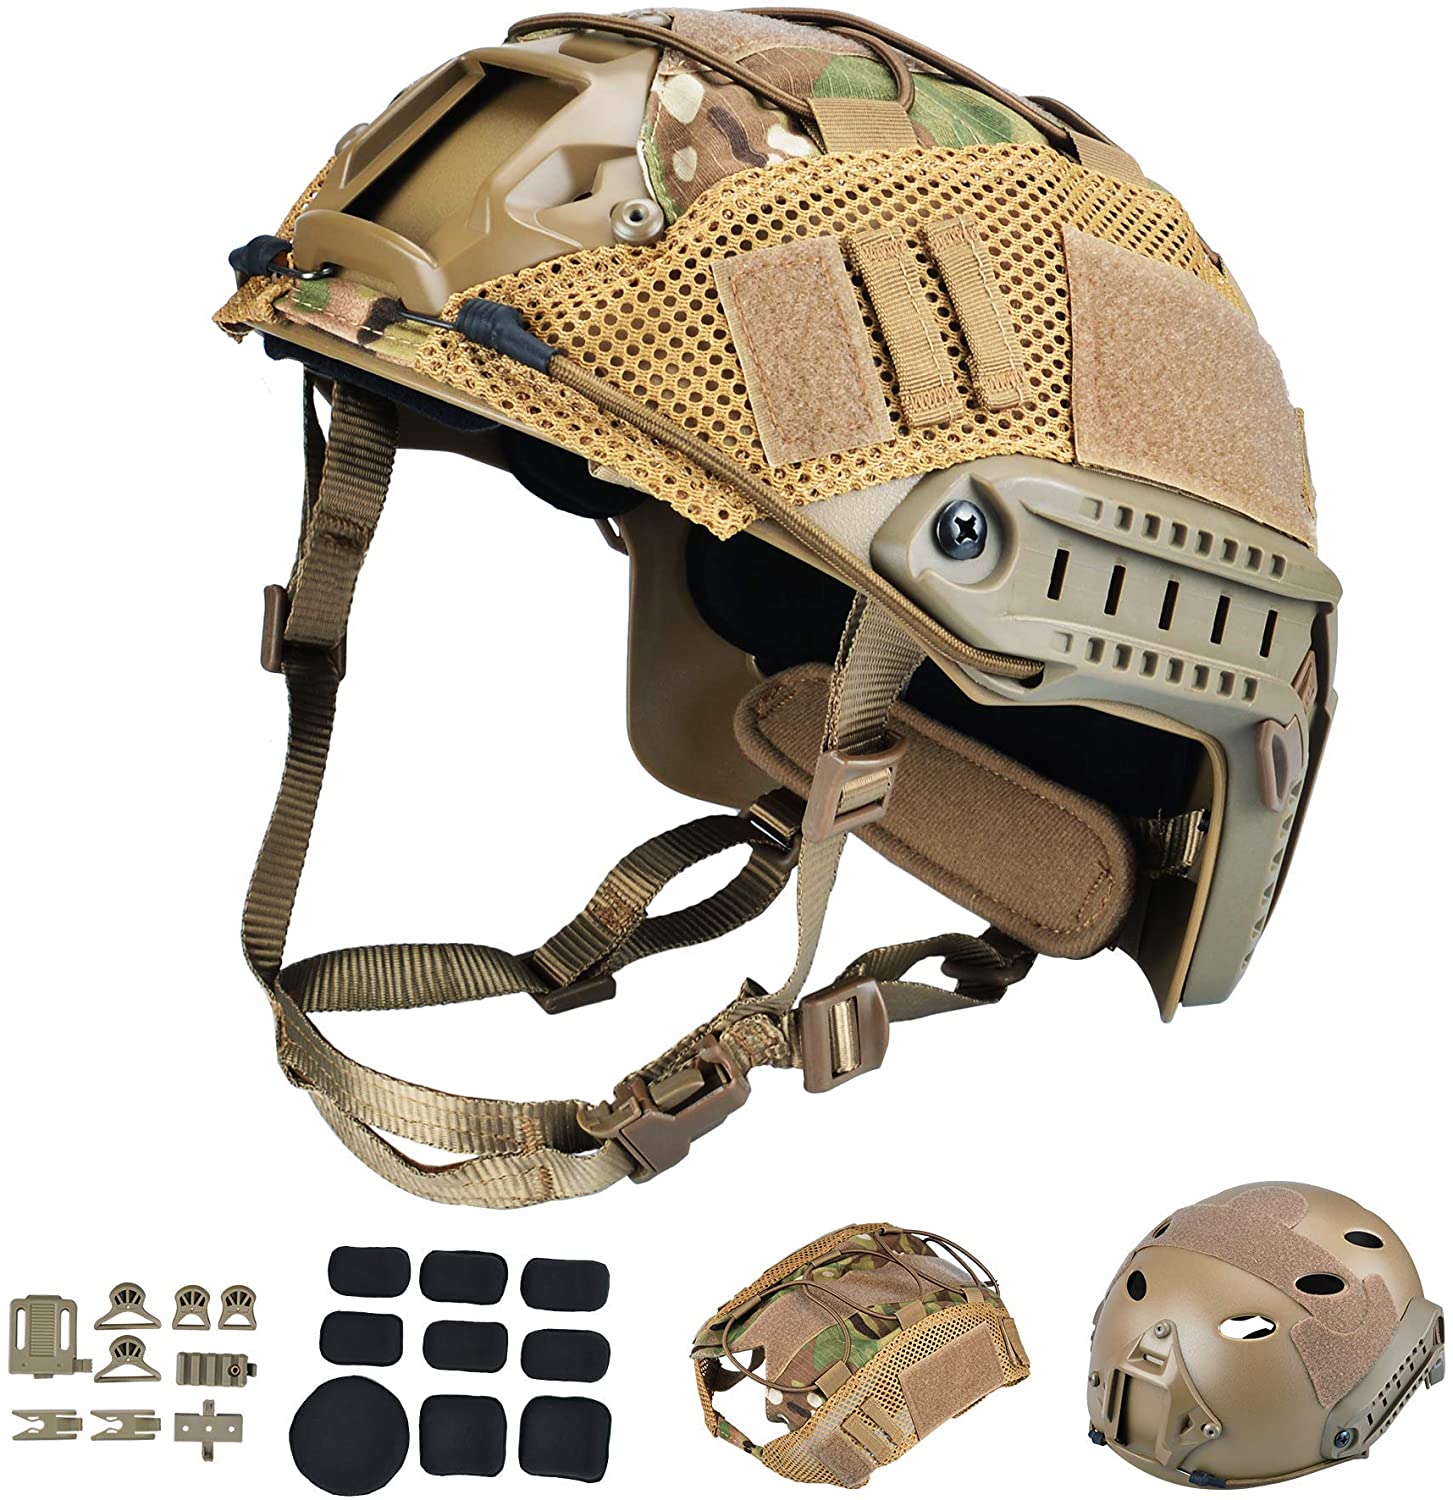 ActionUnion Tactical Airsoft Paintball Fast Helmet